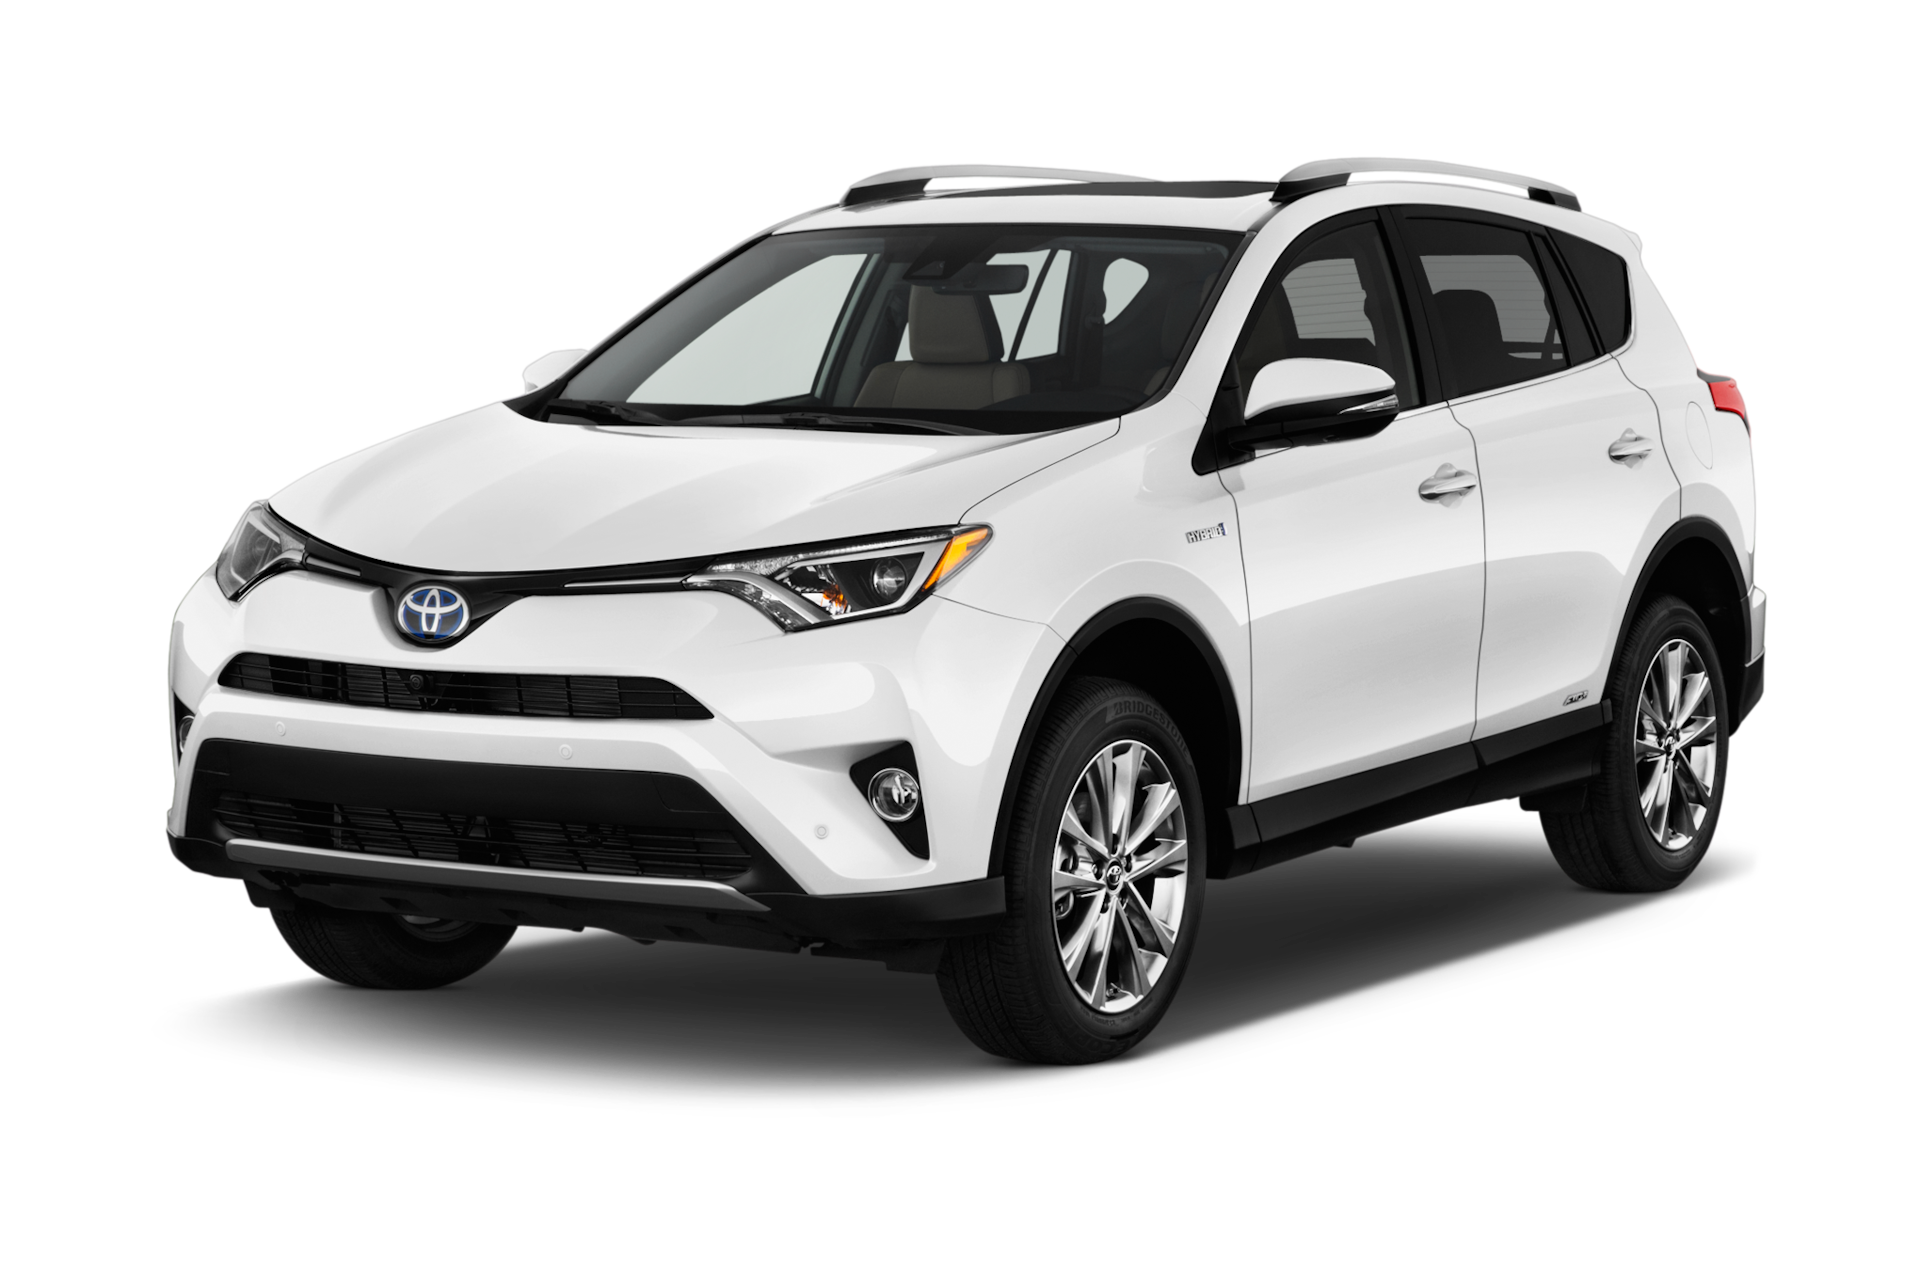 2017 Toyota RAV4 Hybrid Prices, Reviews, and Photos - MotorTrend